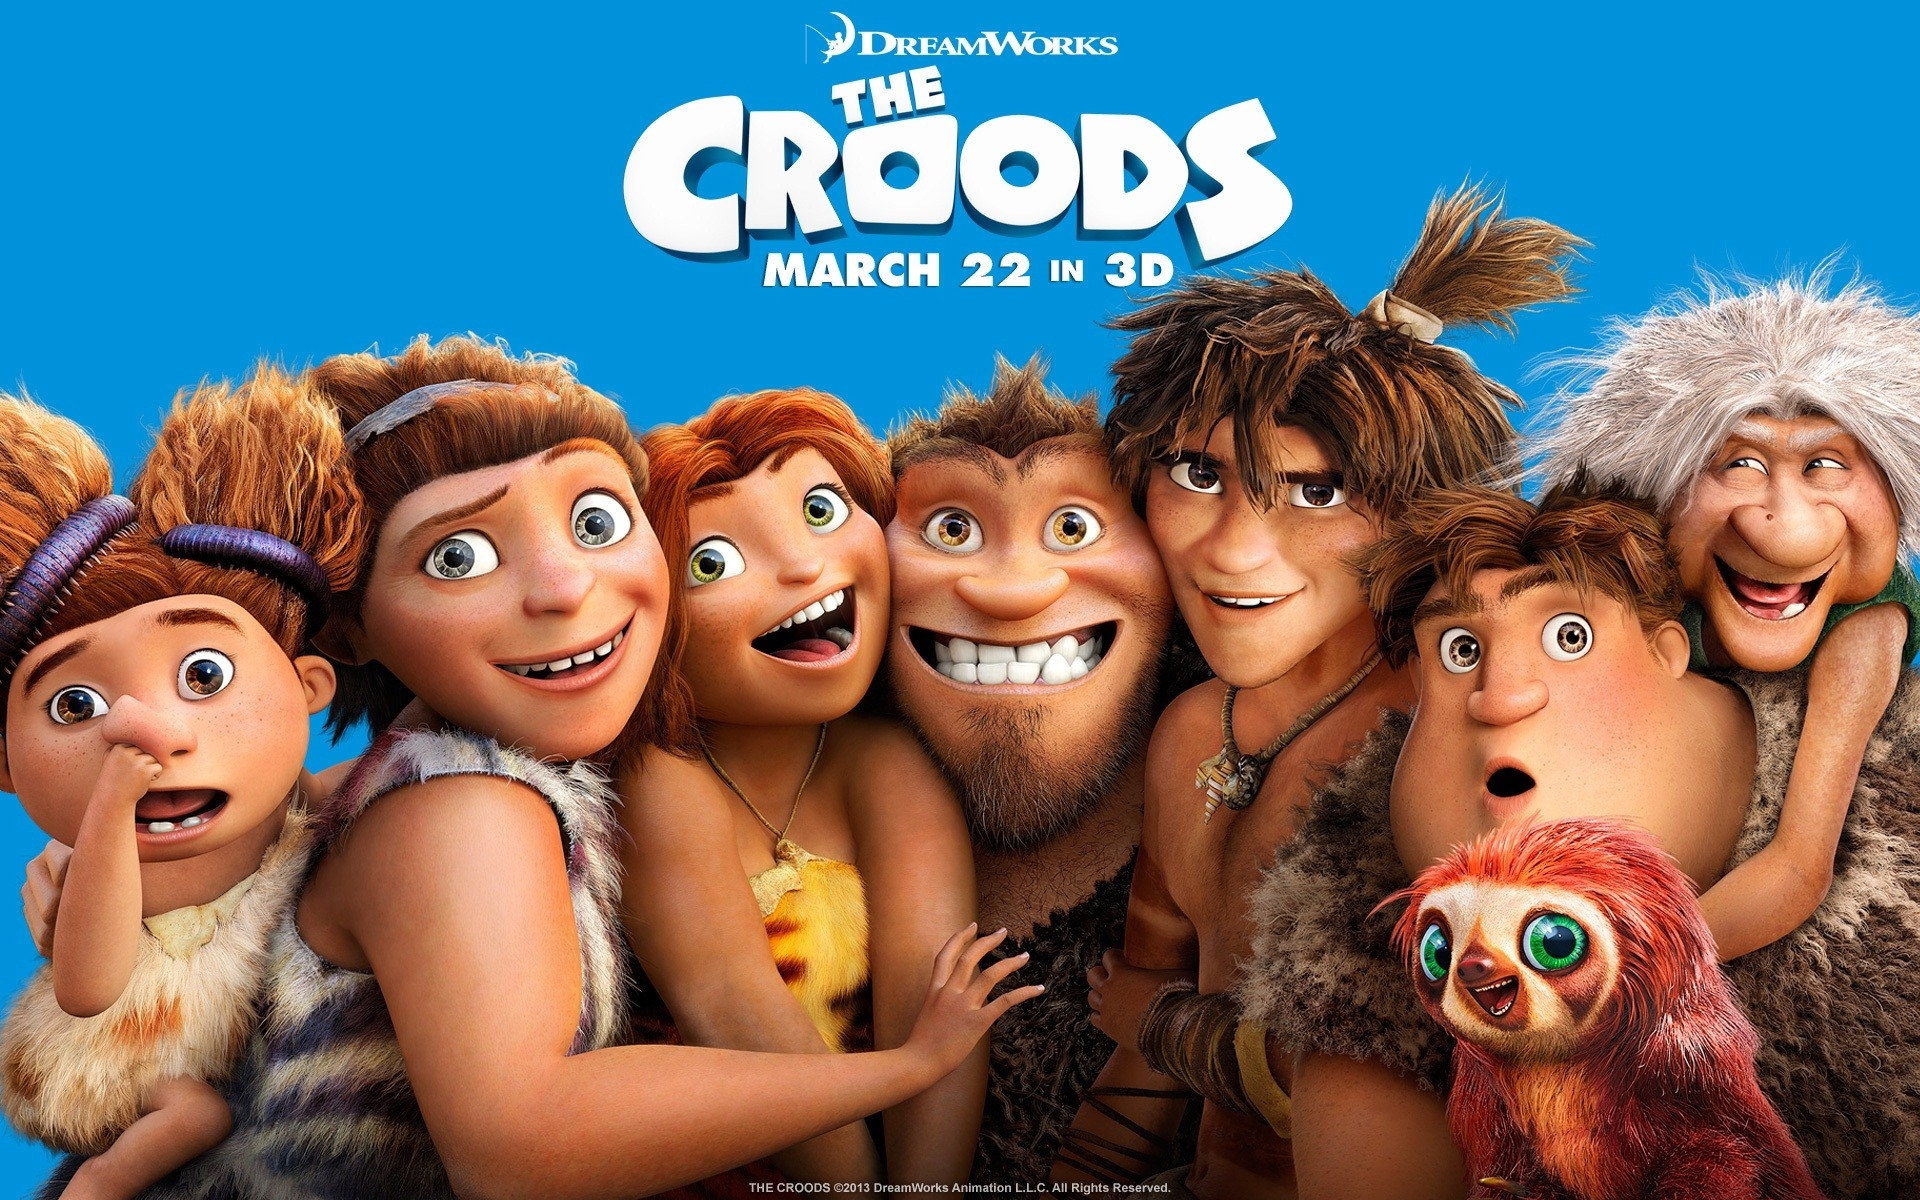 The Croods #4